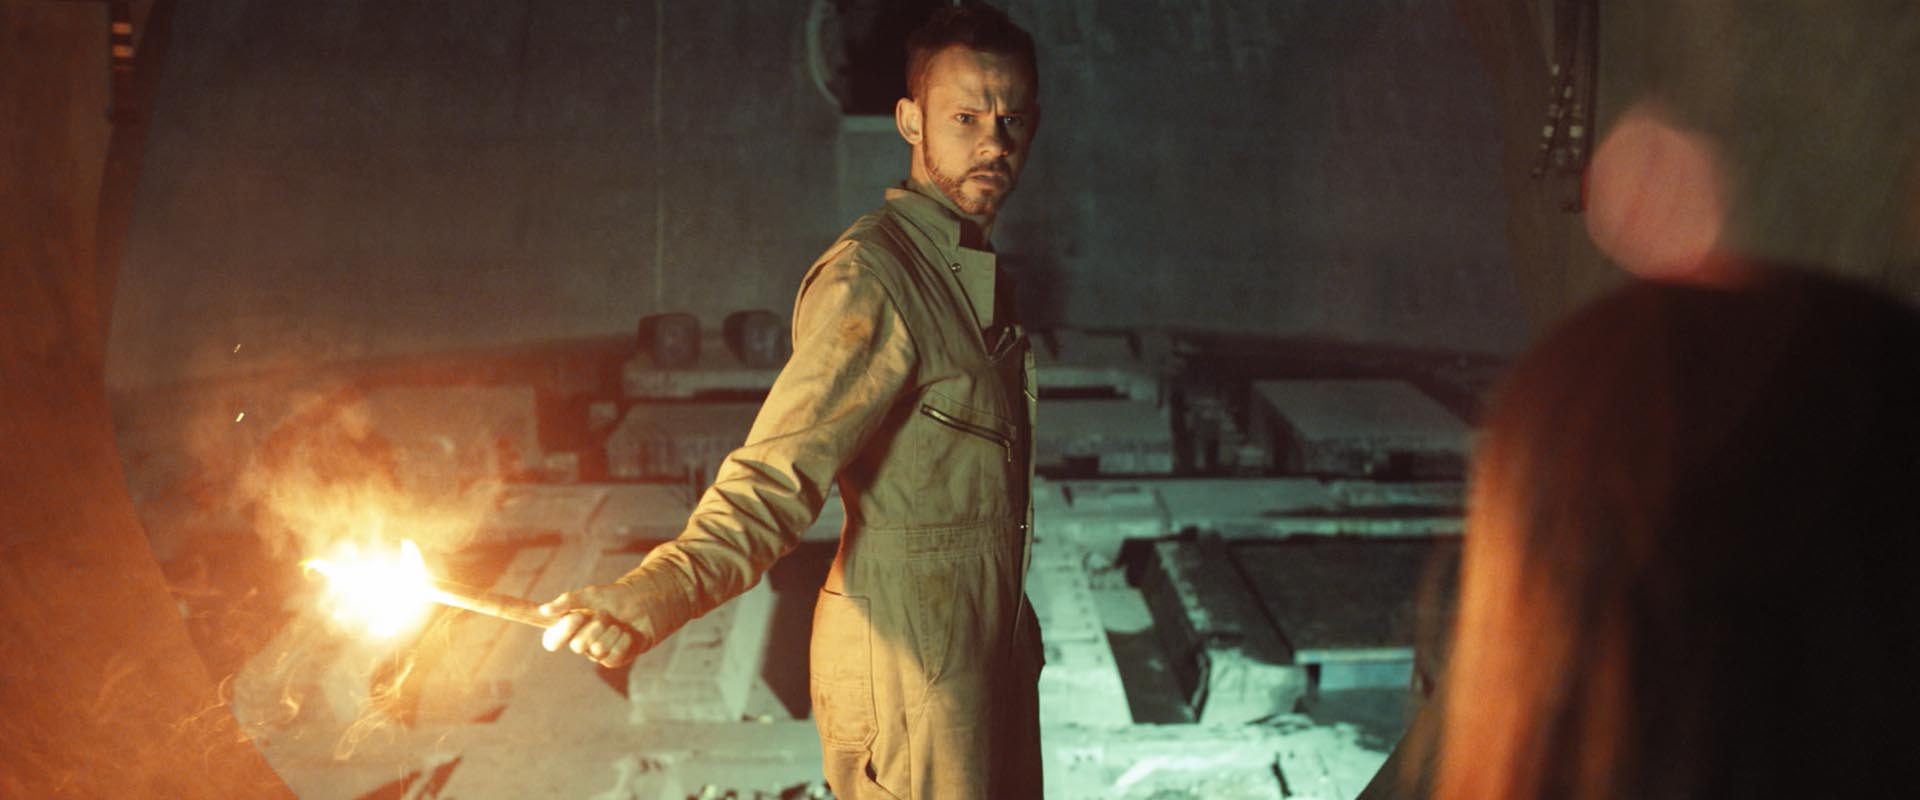 Dominic Monaghan and Sarah Habel's Atomica to be Distributed by Syfy Films